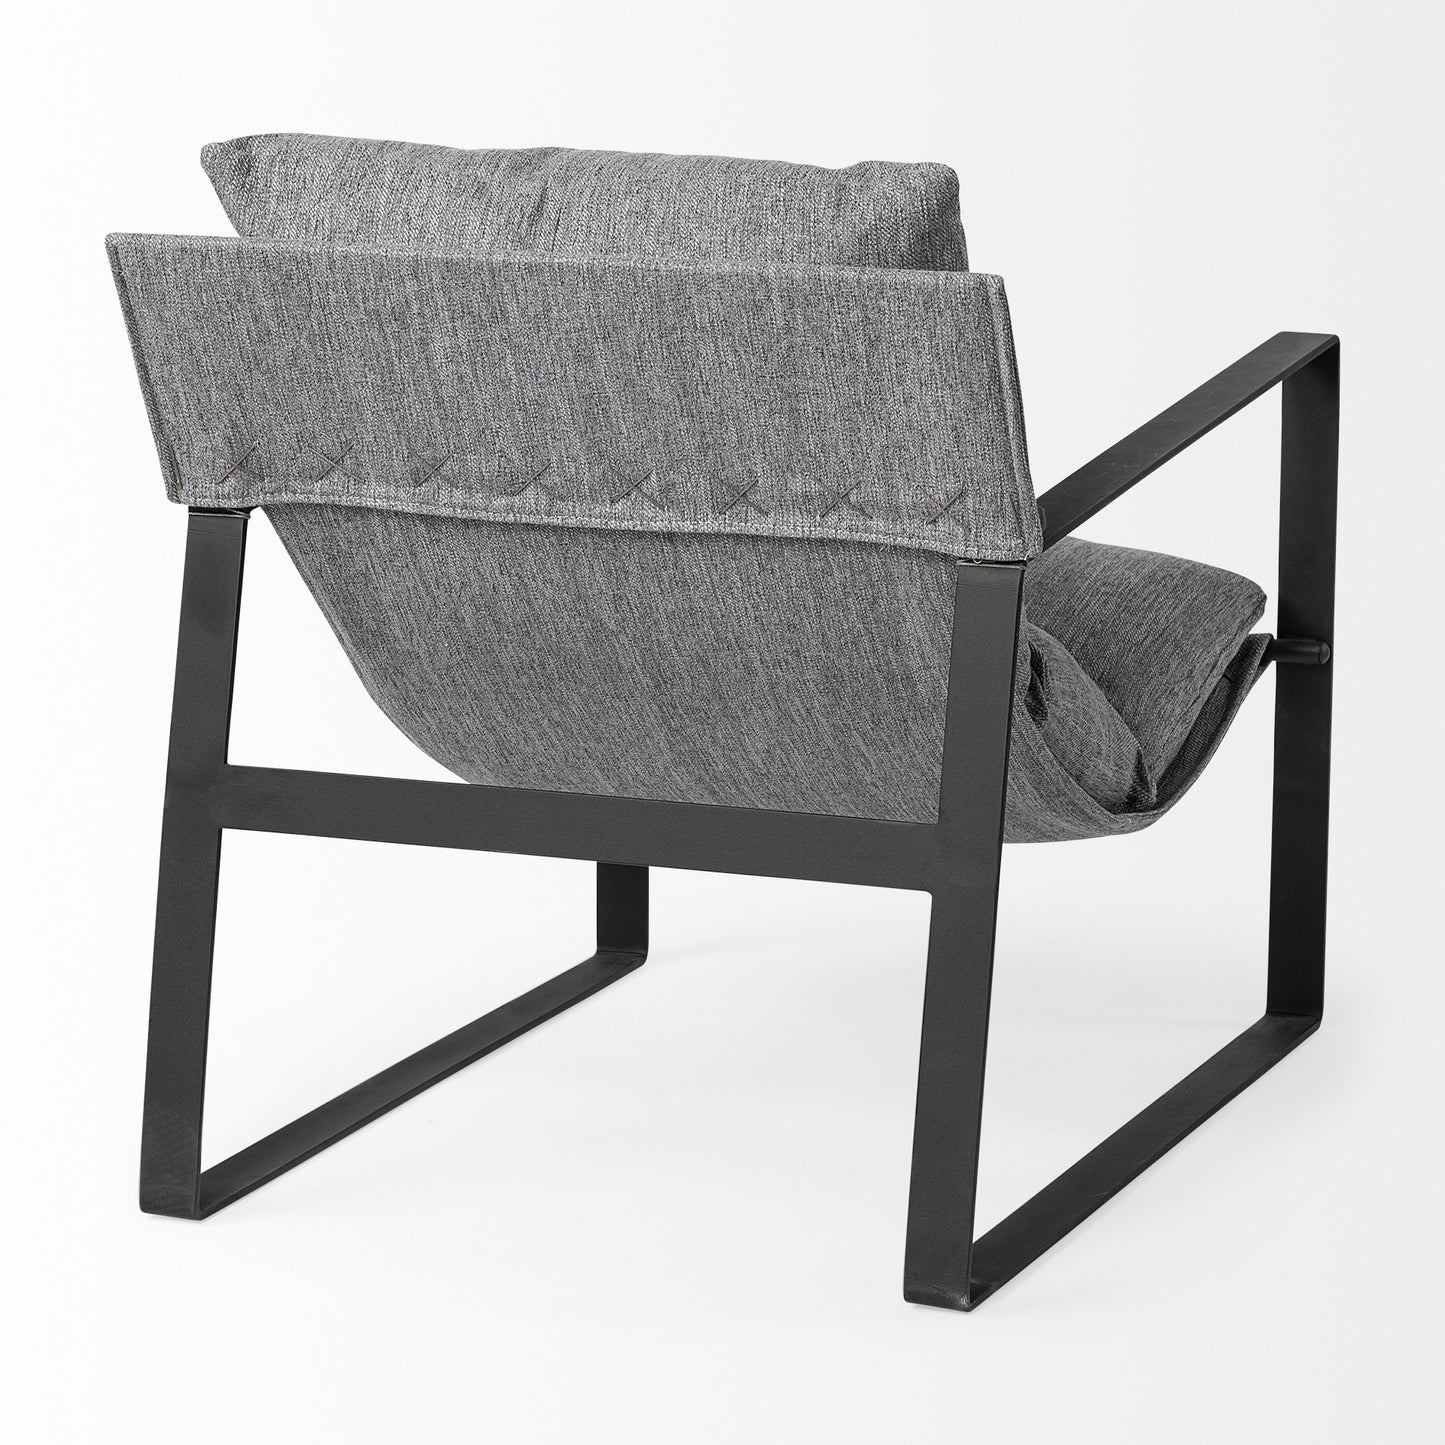 35" Gray And Black Fabric Lounge Chair